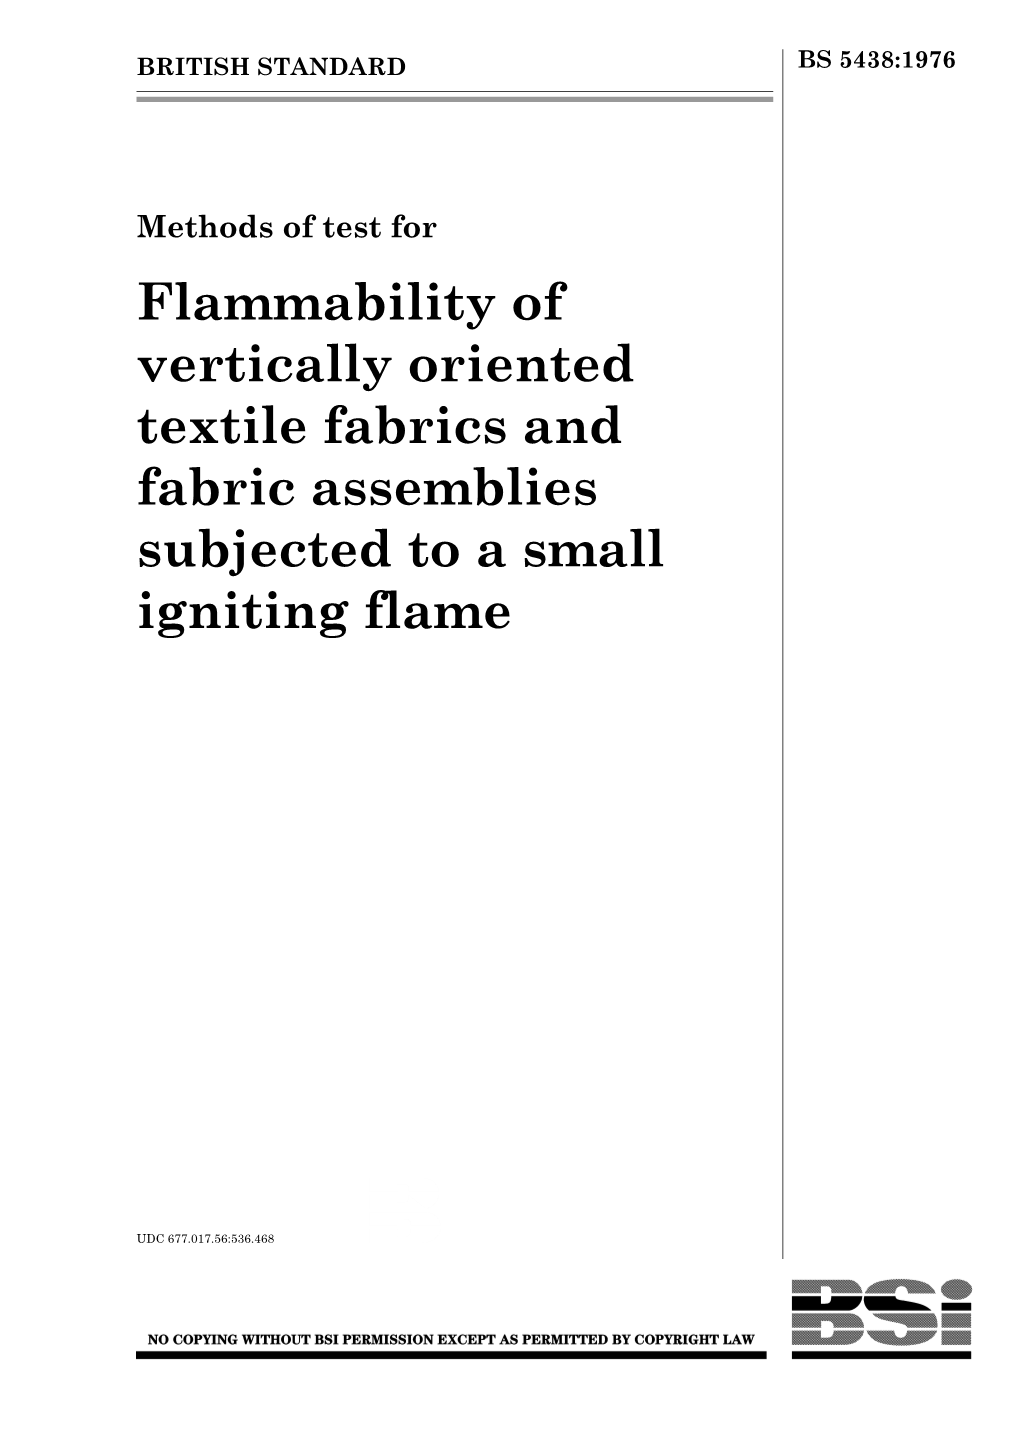 Flammability of Vertically Oriented Textile Fabrics and Fabric Assemblies Subjected to a Small Igniting Flame